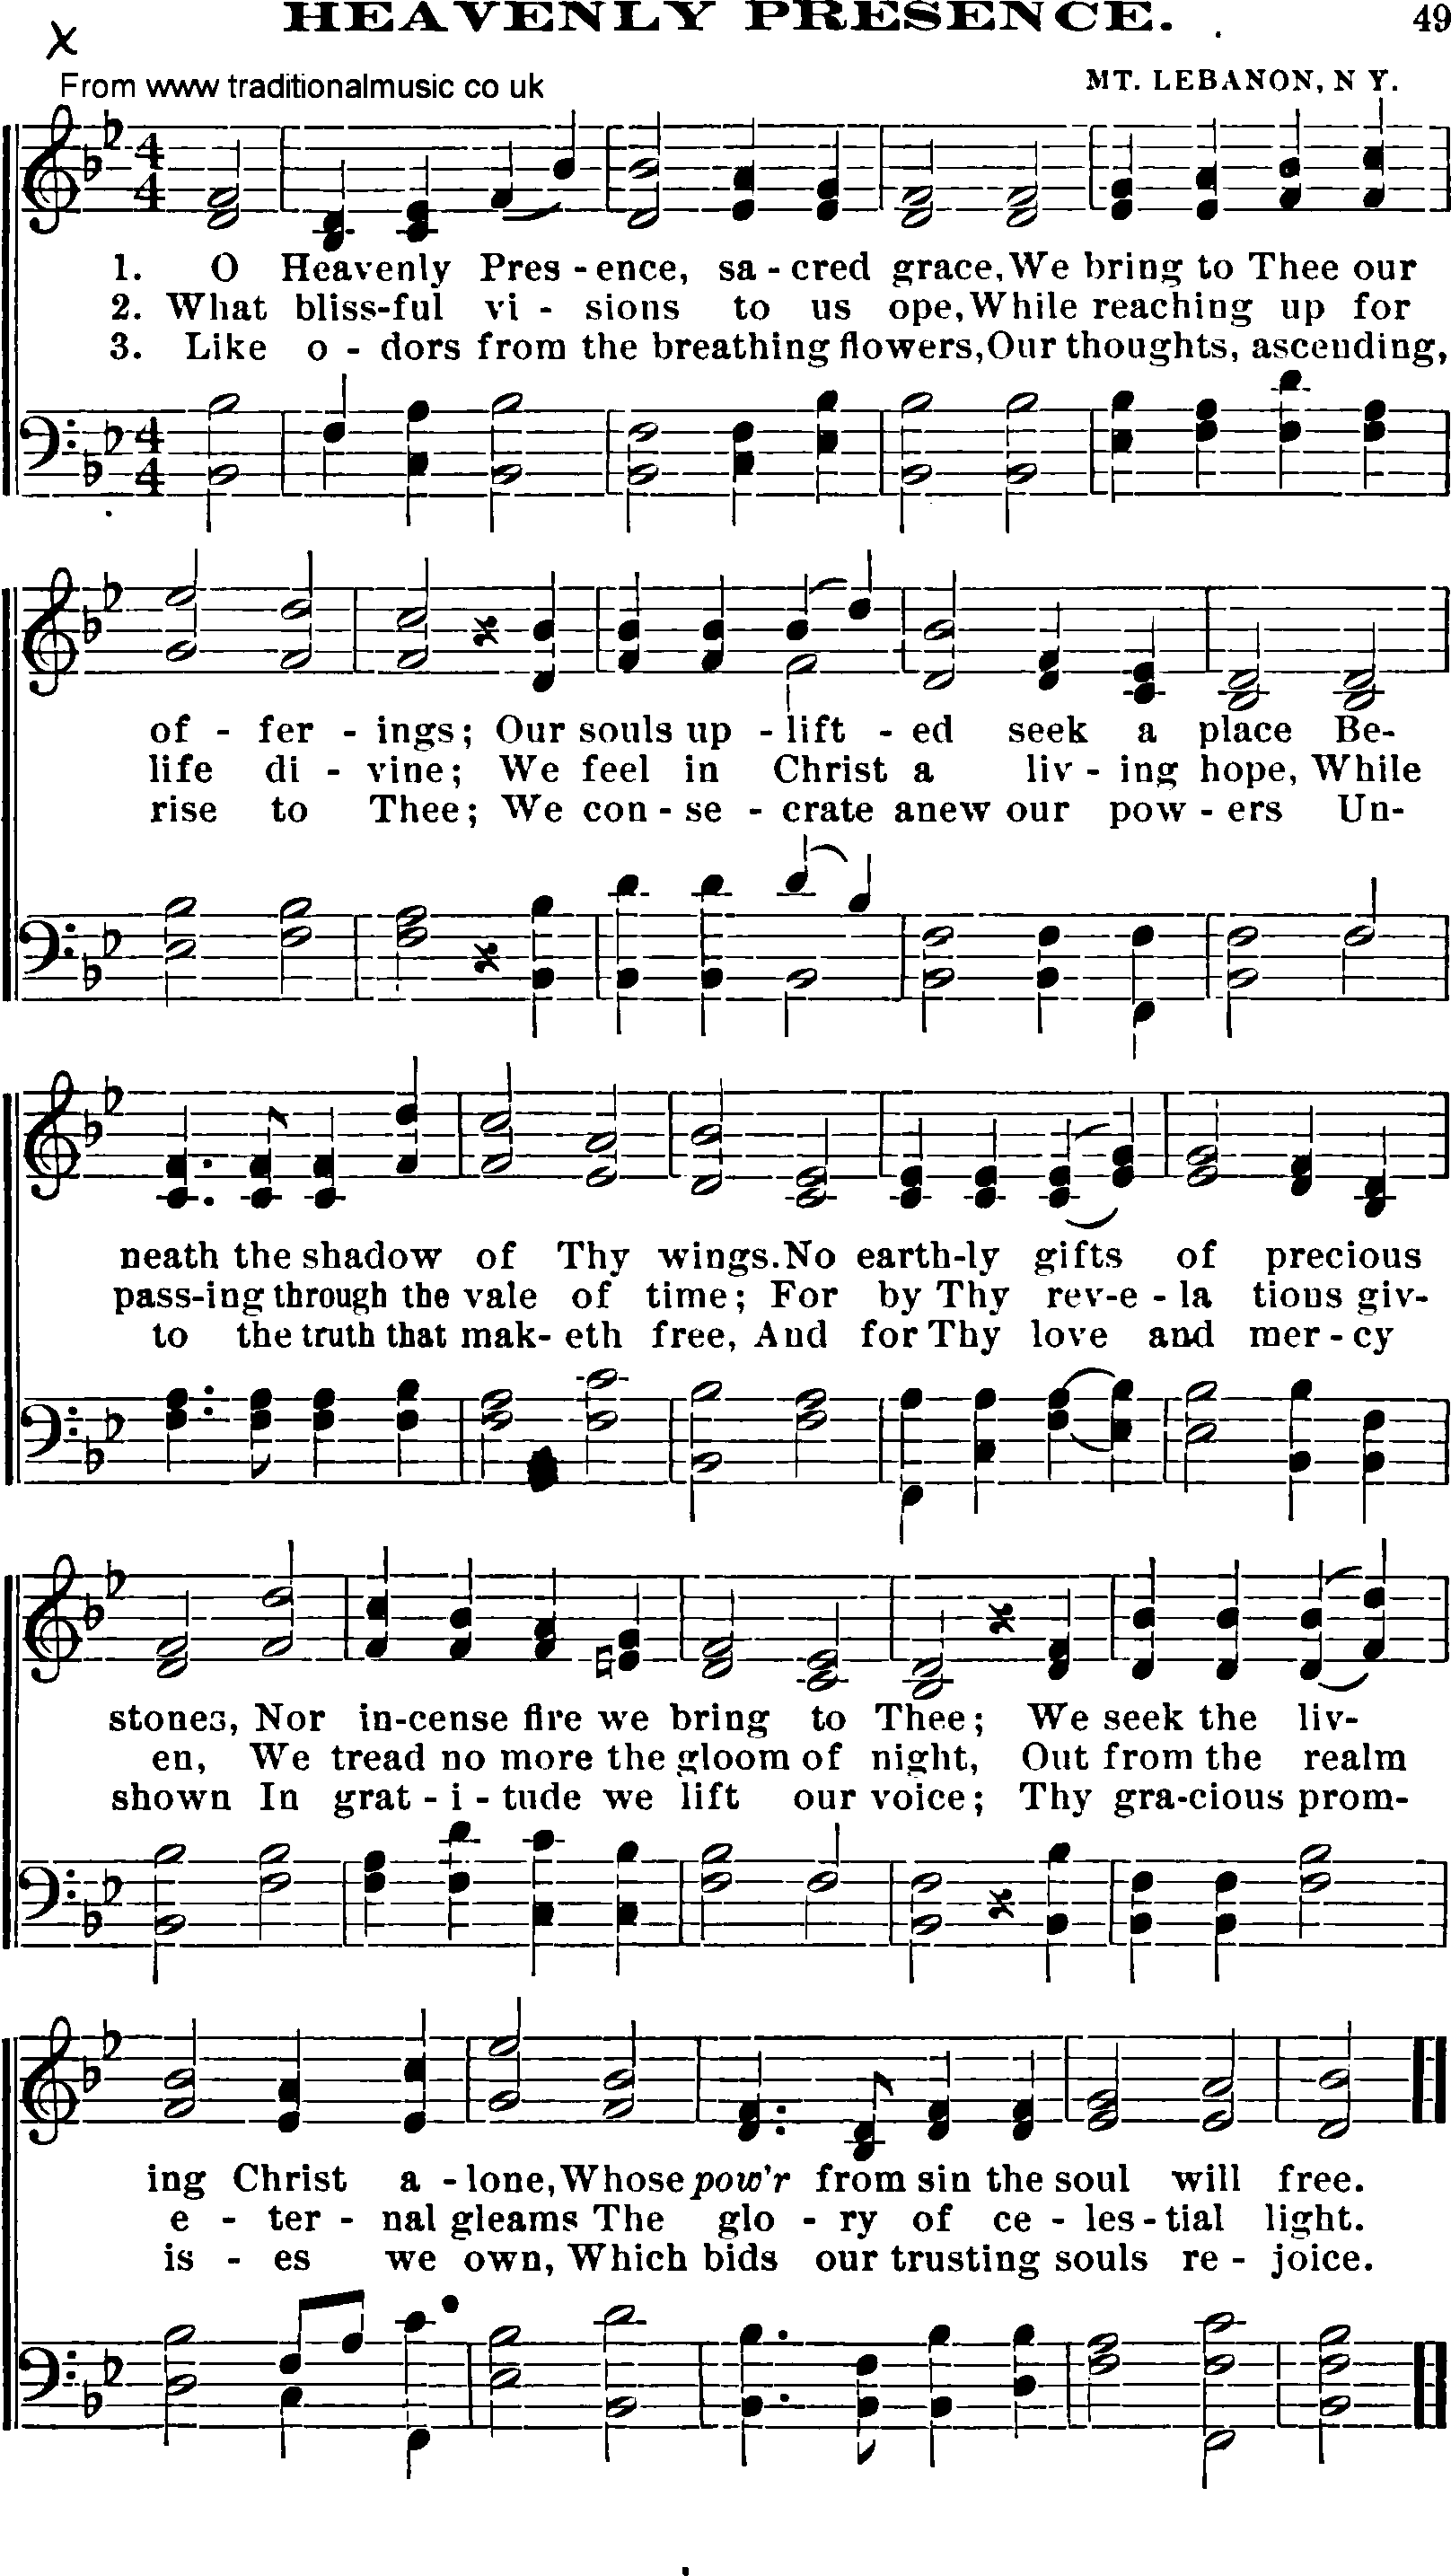 Shaker Music collection, Hymn: heavenly presence, sheetmusic and PDF